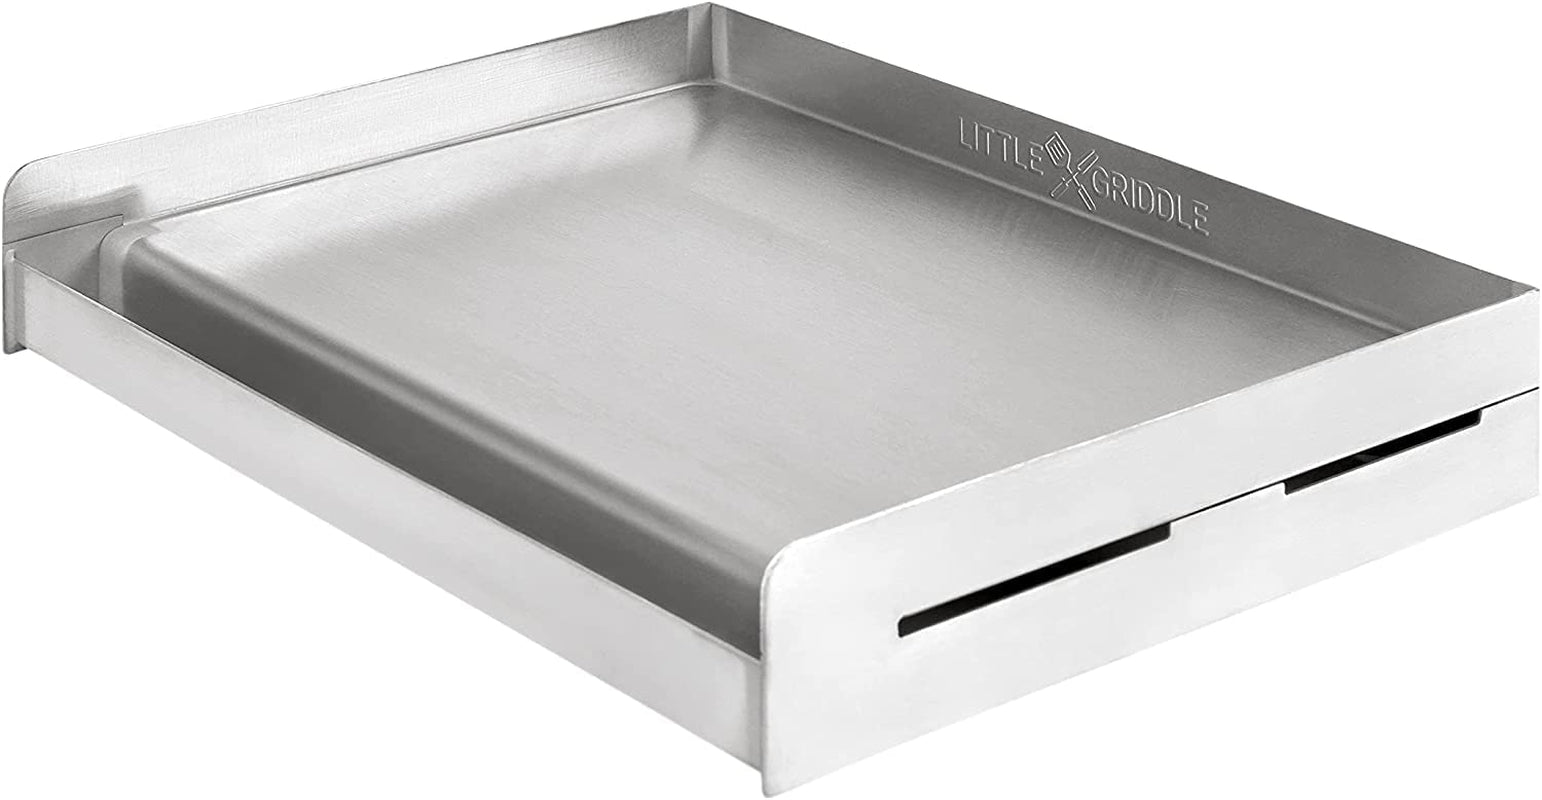 Little Griddle, LITTLE GRIDDLE Sizzle-Q SQ180 100% Stainless Steel Universal Griddle with Even Heating Cross Bracing for Charcoal/Gas Grills, Camping, Tailgating, and Parties (18"X13"X3")